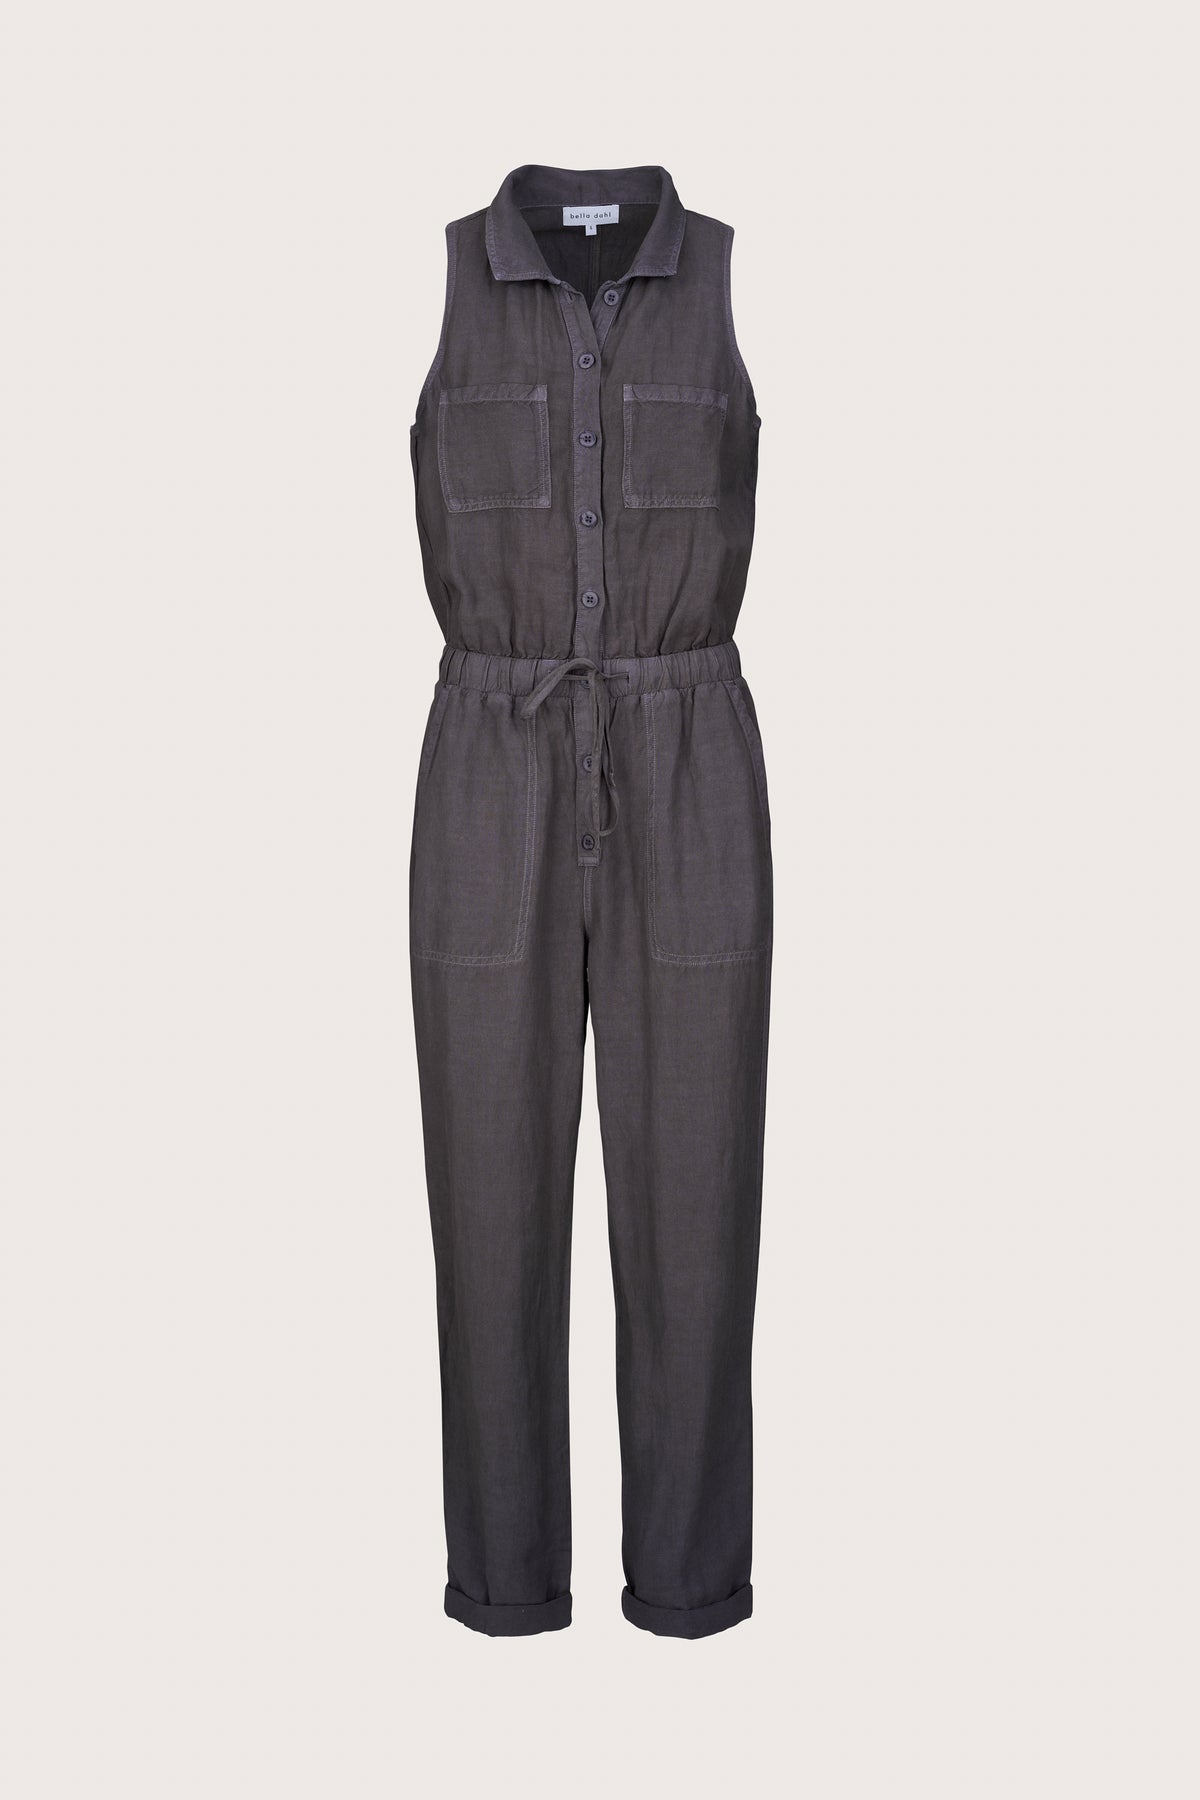 Sleeveless jumpsuit with a classic collar and drawstring waist